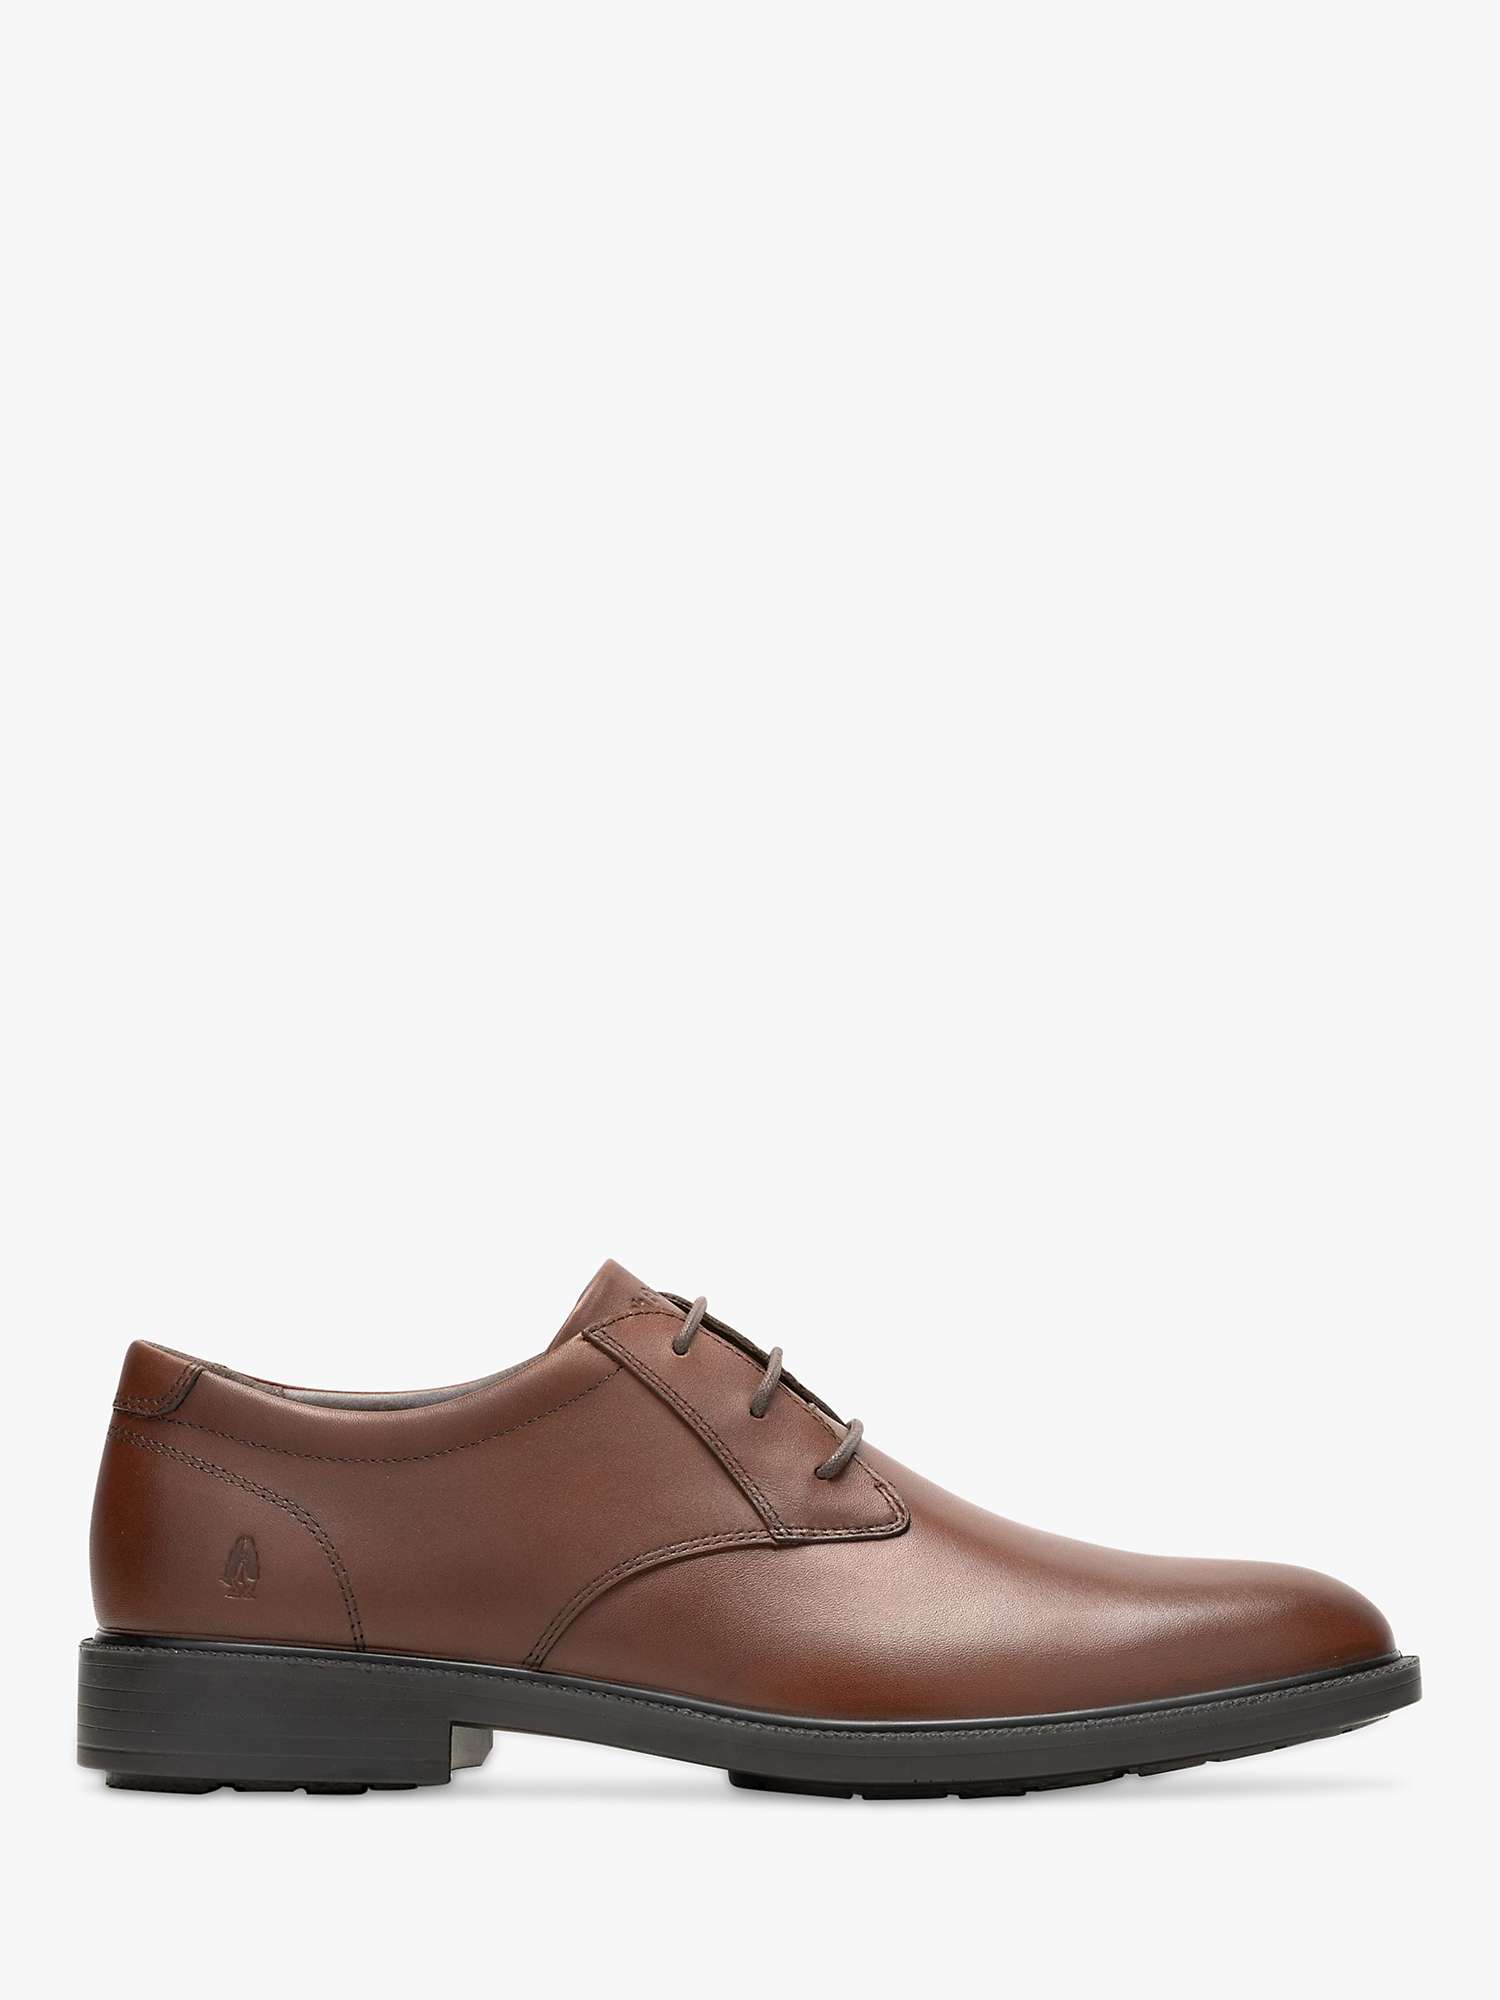 Buy Hush Puppies Banker Lace-Up Shoes Online at johnlewis.com